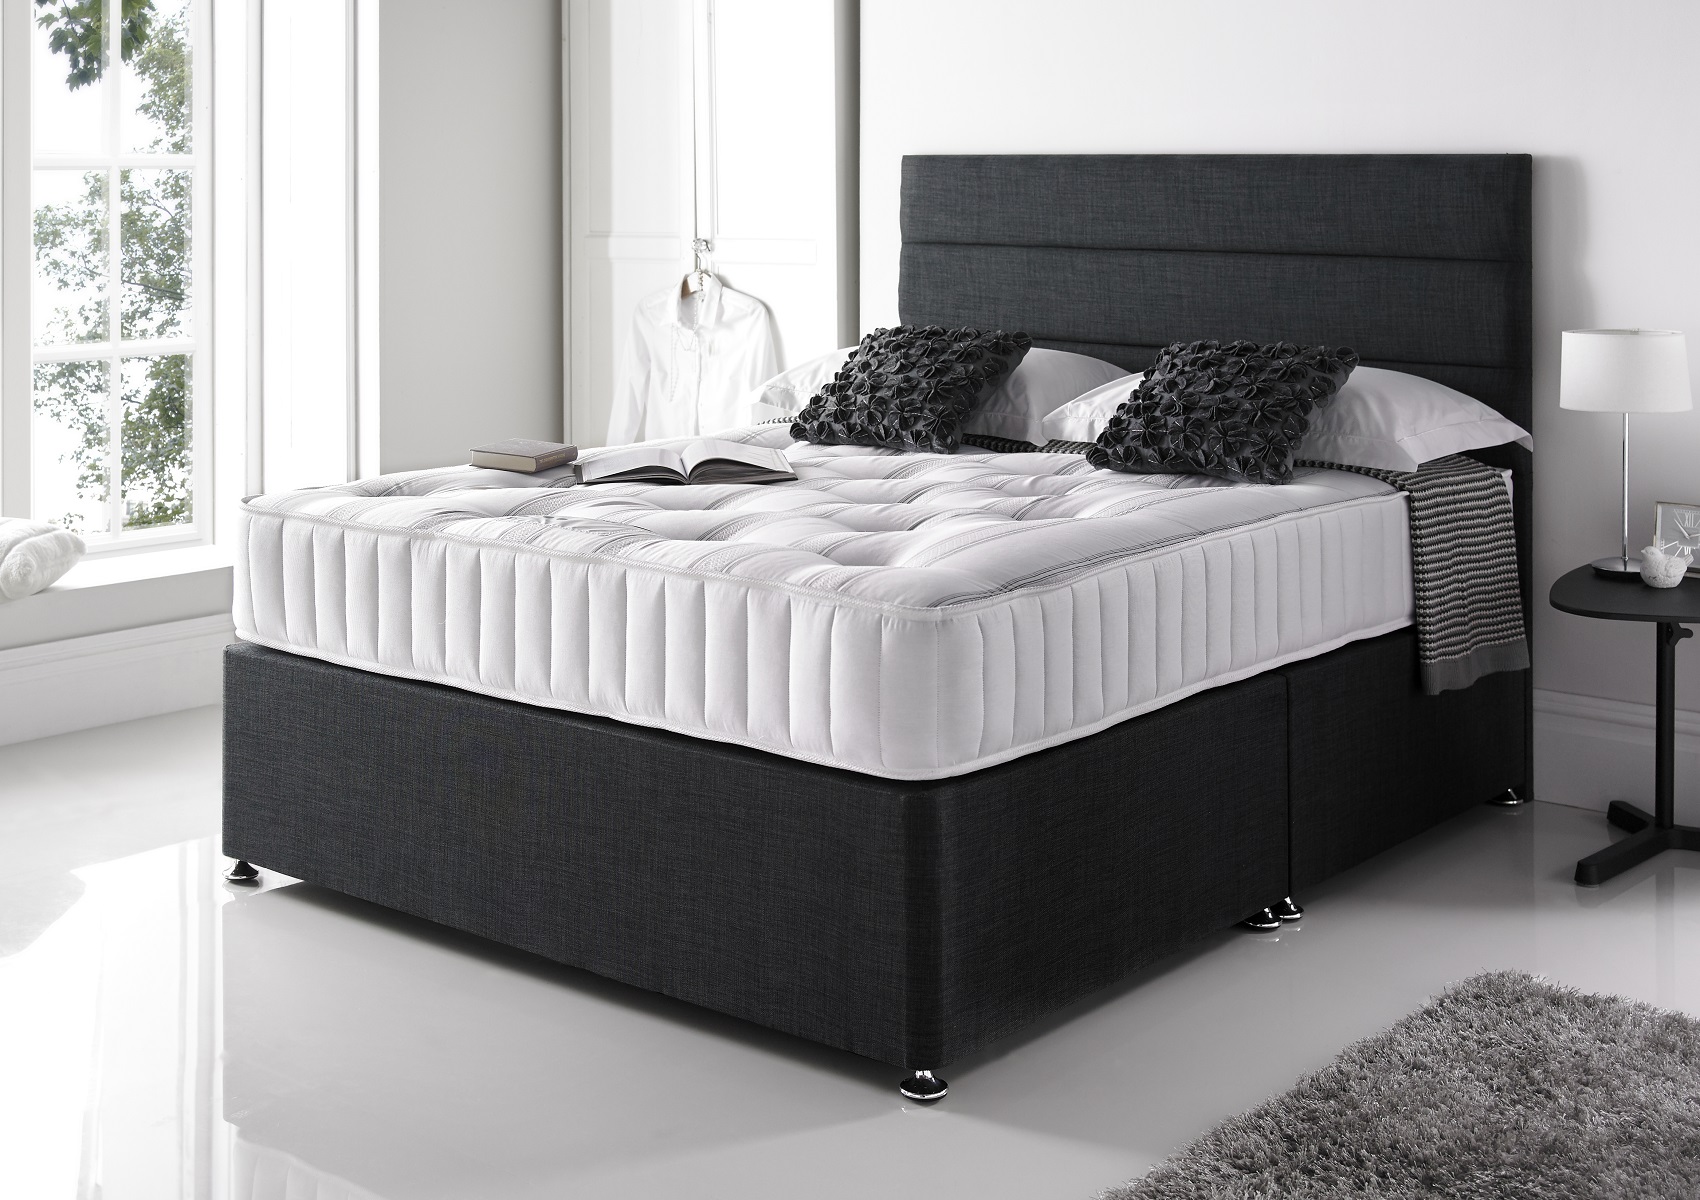 View Essentials Charcoal Upholstered Super King Divan Bed Time4Sleep information